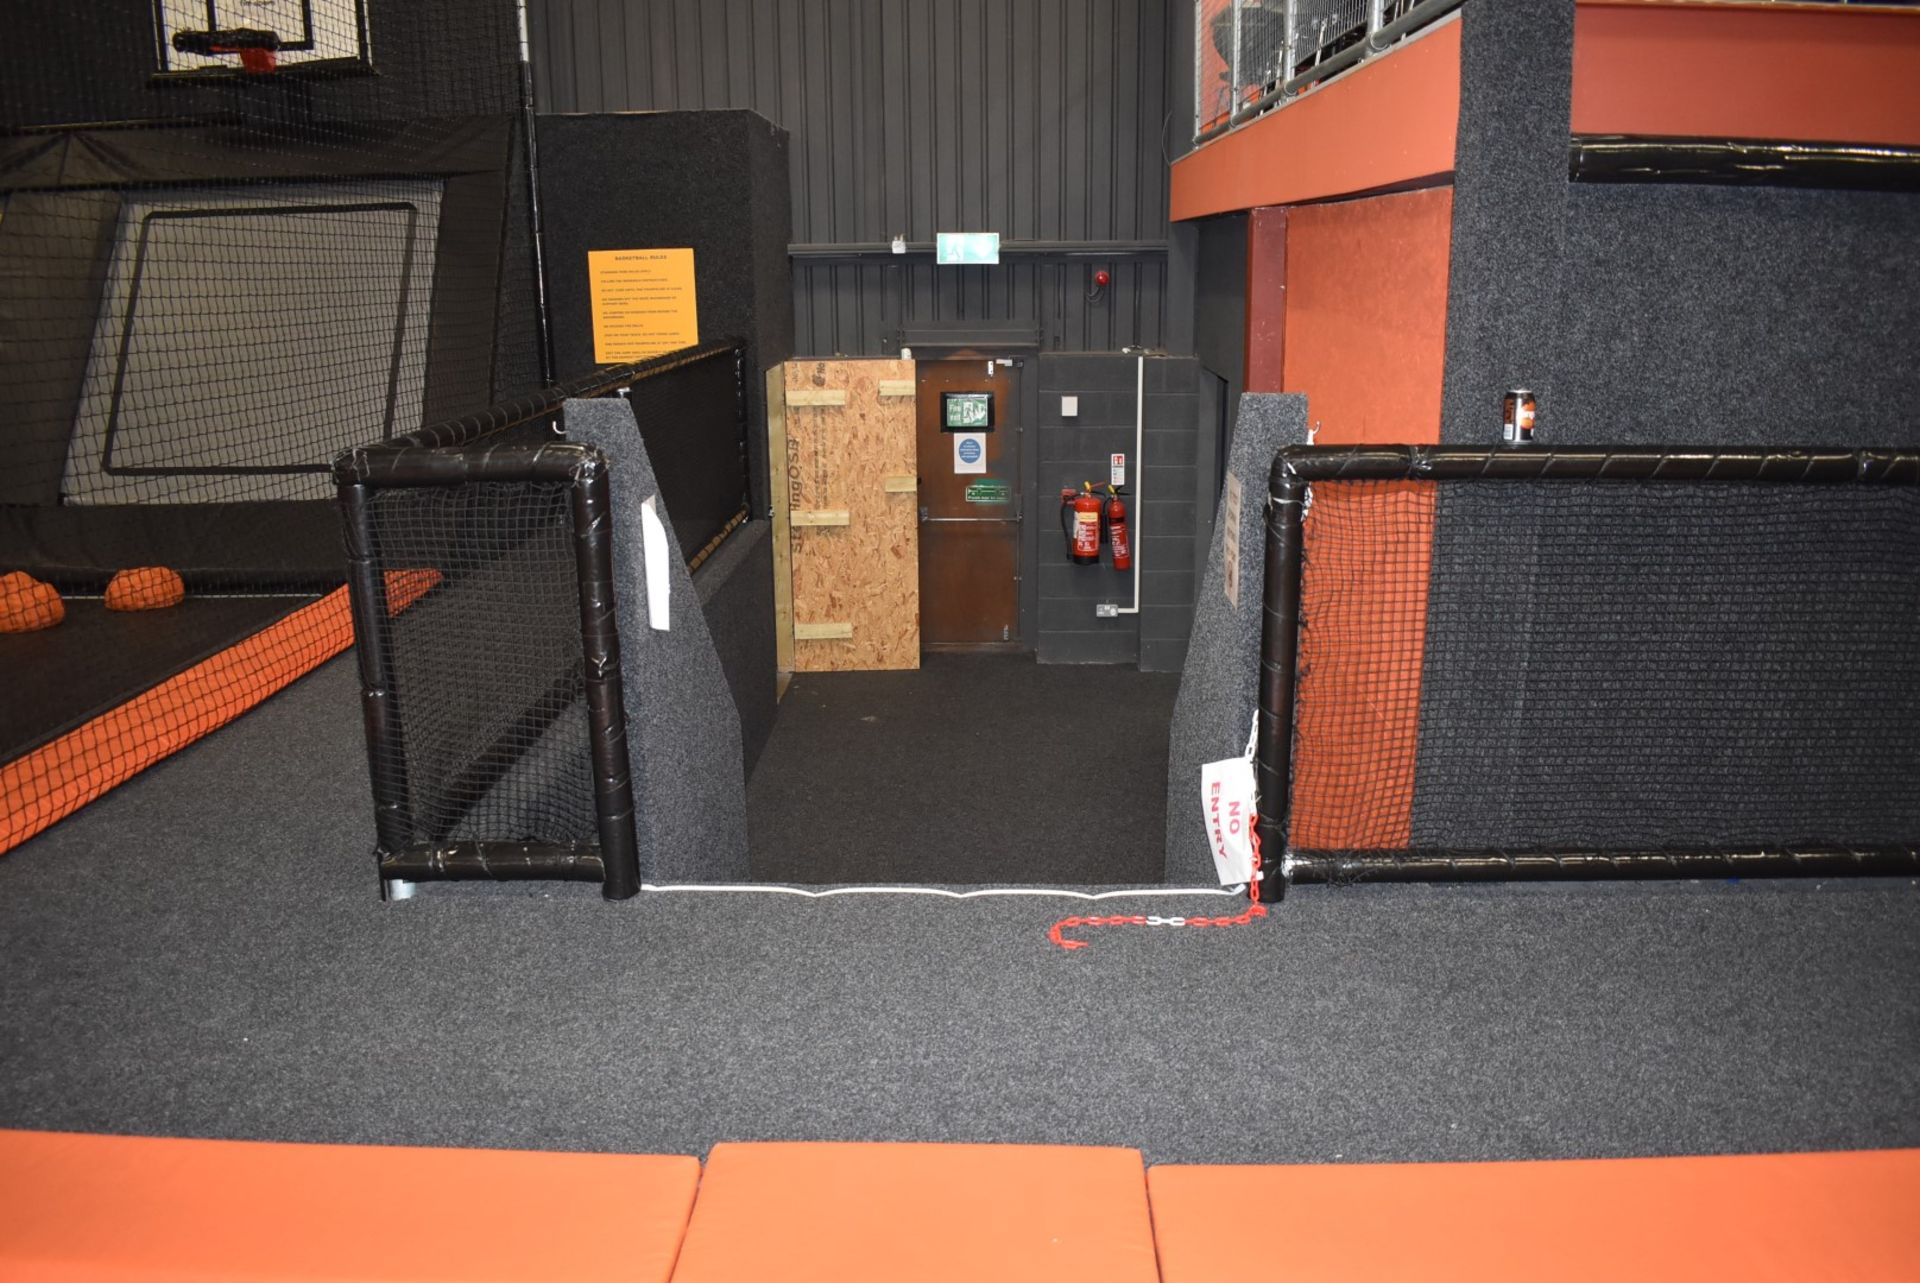 1 x Large Trampoline Park - Disassembled - Includes Dodgeball Arena And Jump Tower - CL766  - - Image 95 of 99